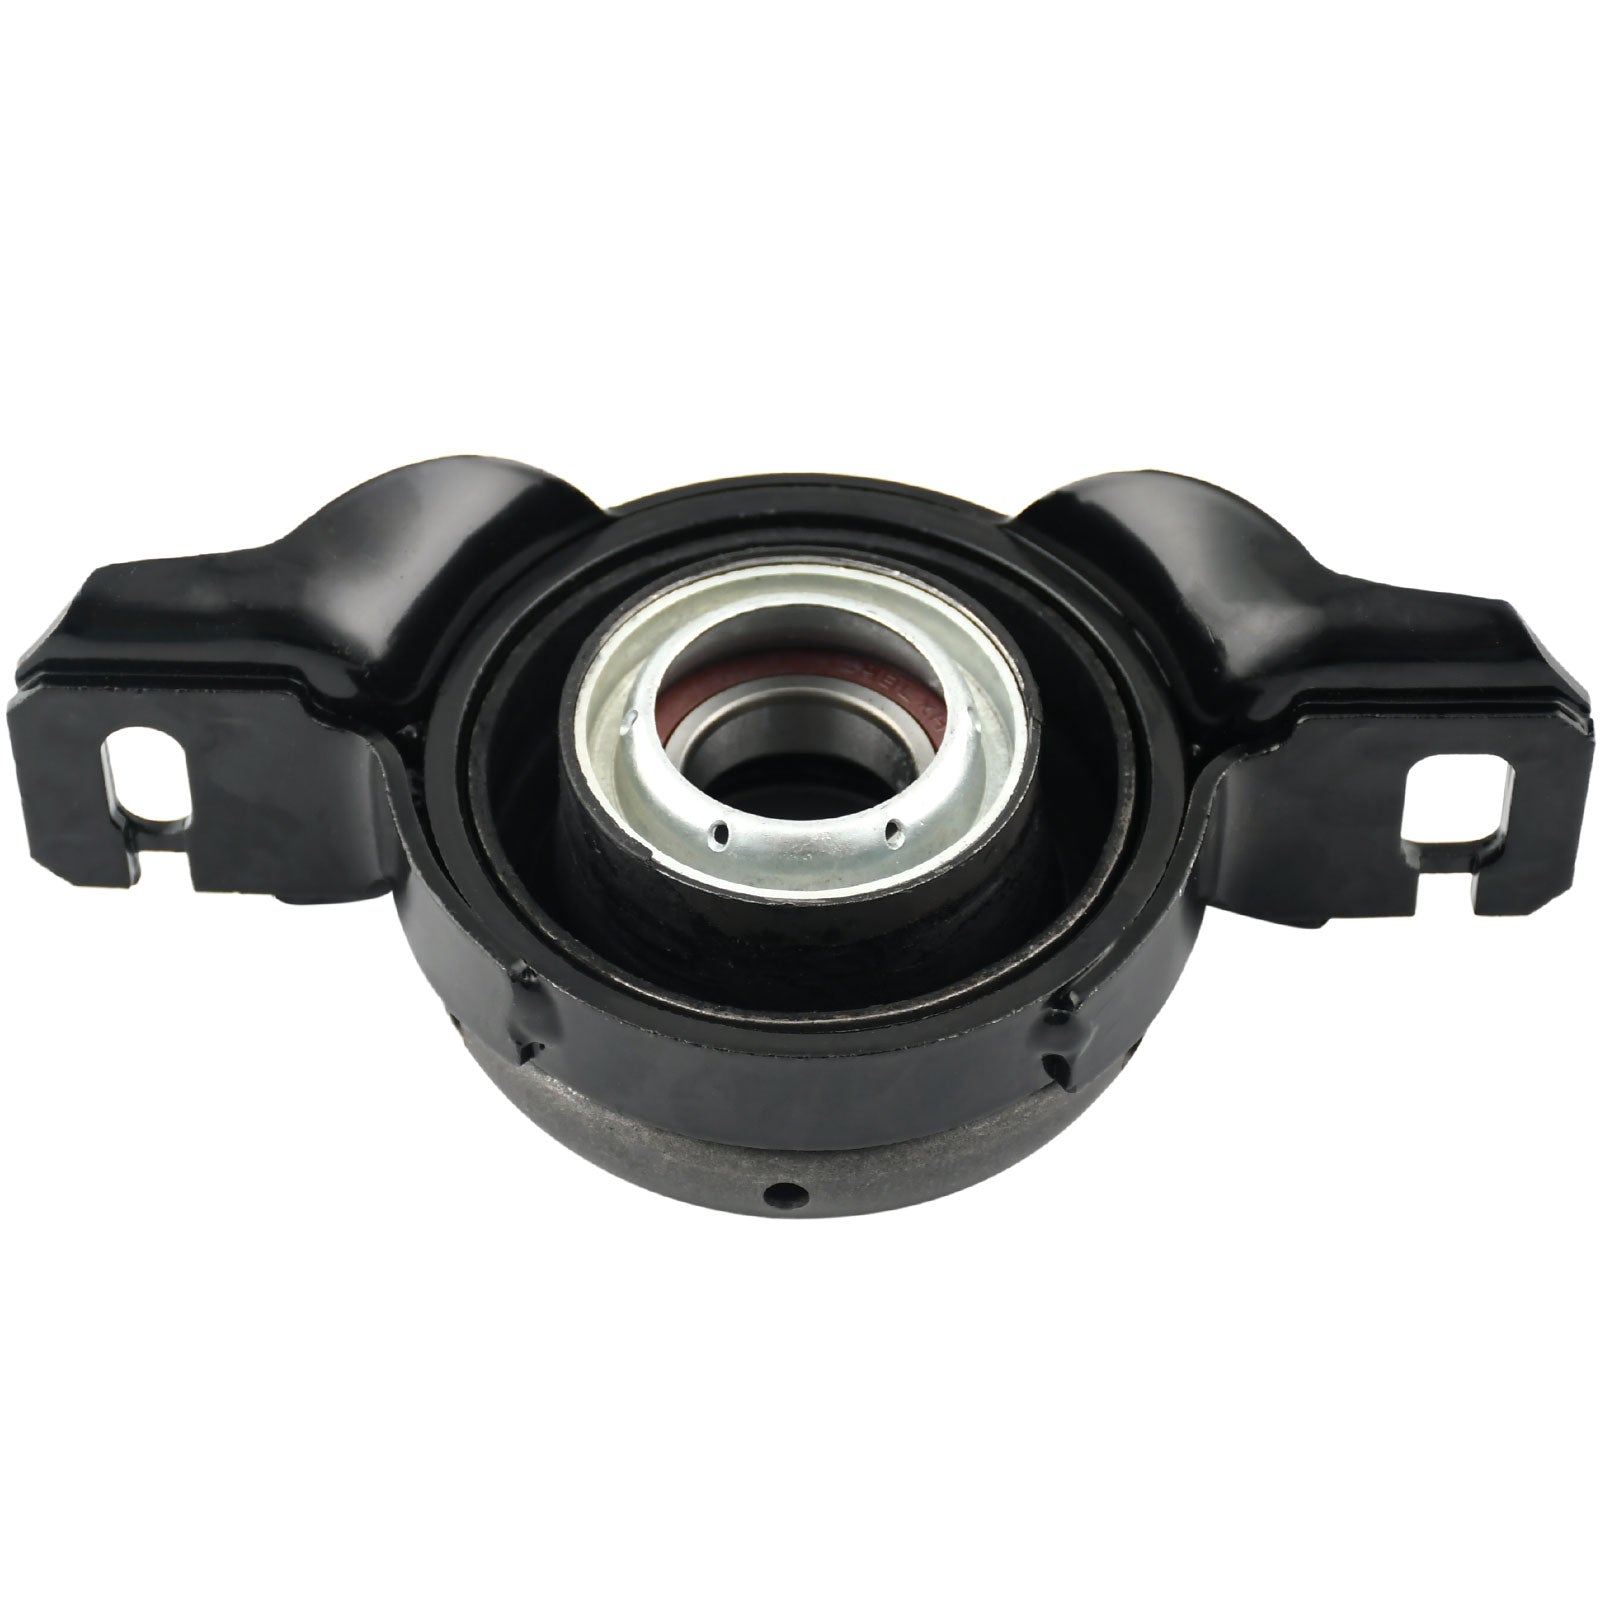 MotorbyMotor Front Driveshaft Center Support Bearing Fits for Lexus RX300 RX330 RX350 RX450H, Toyota Highlander Center Support Assembly MotorbyMotor